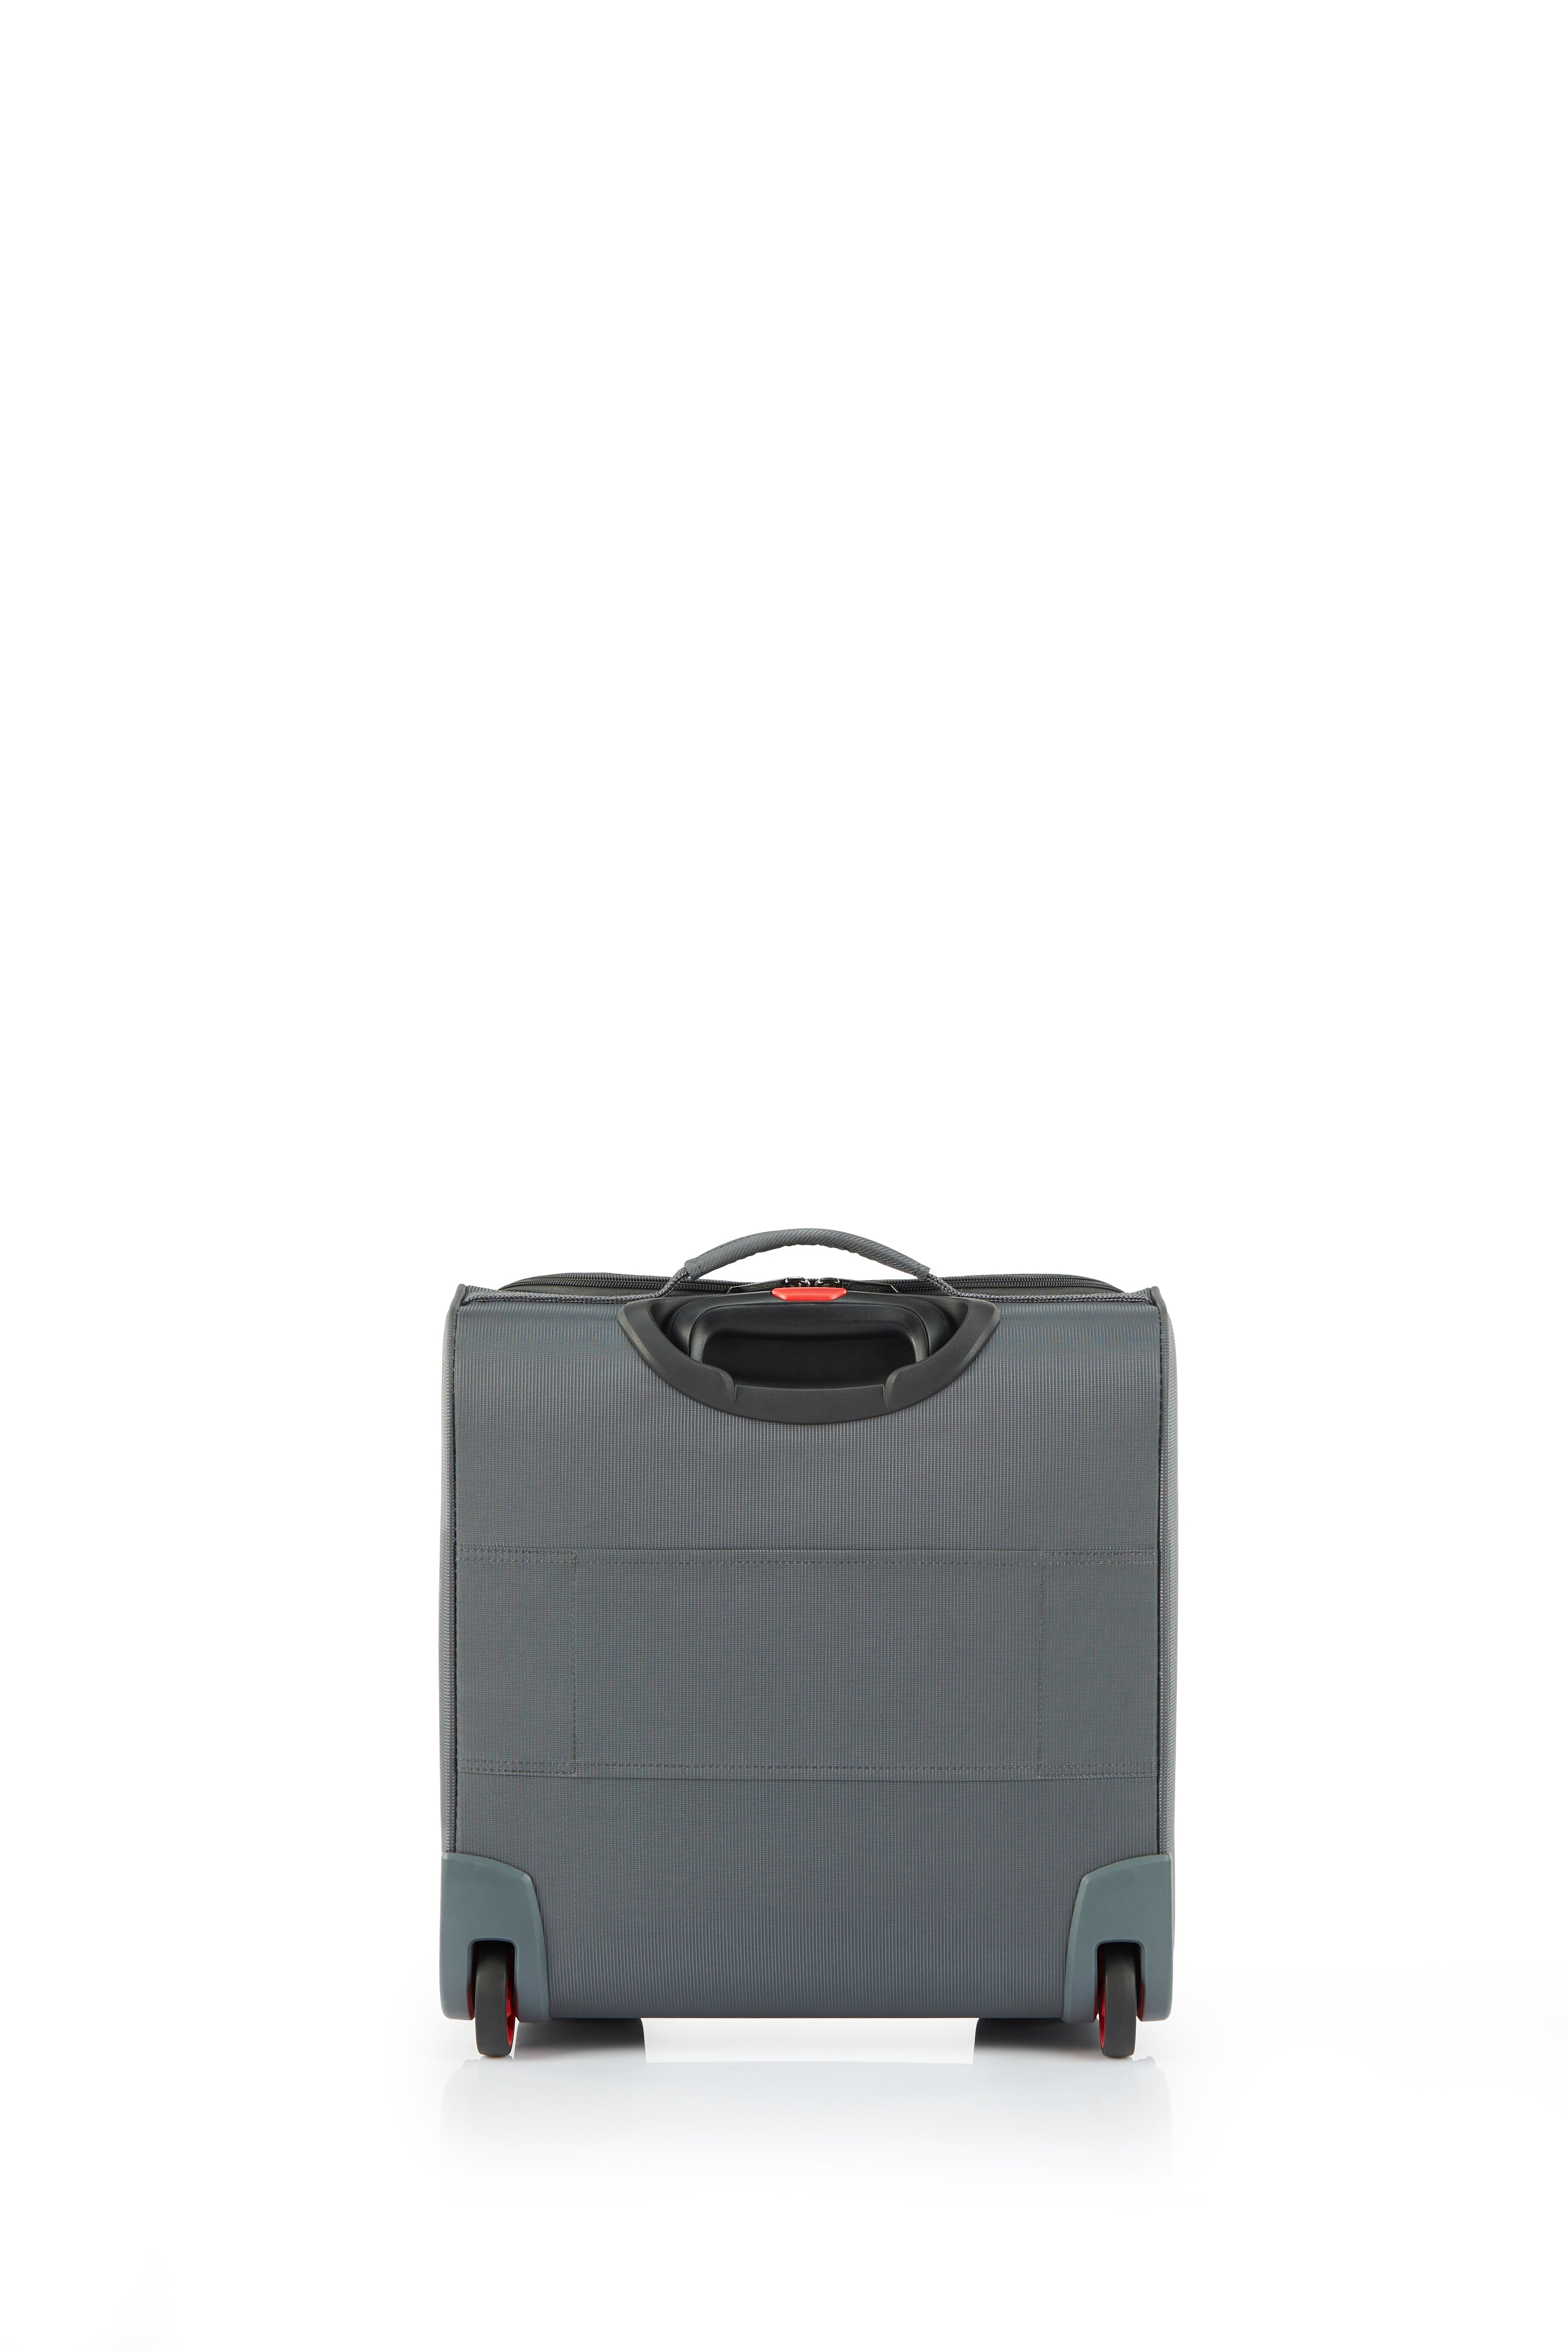 American Tourister - Applite ECO Underseater Suitcase - Grey/Red-5